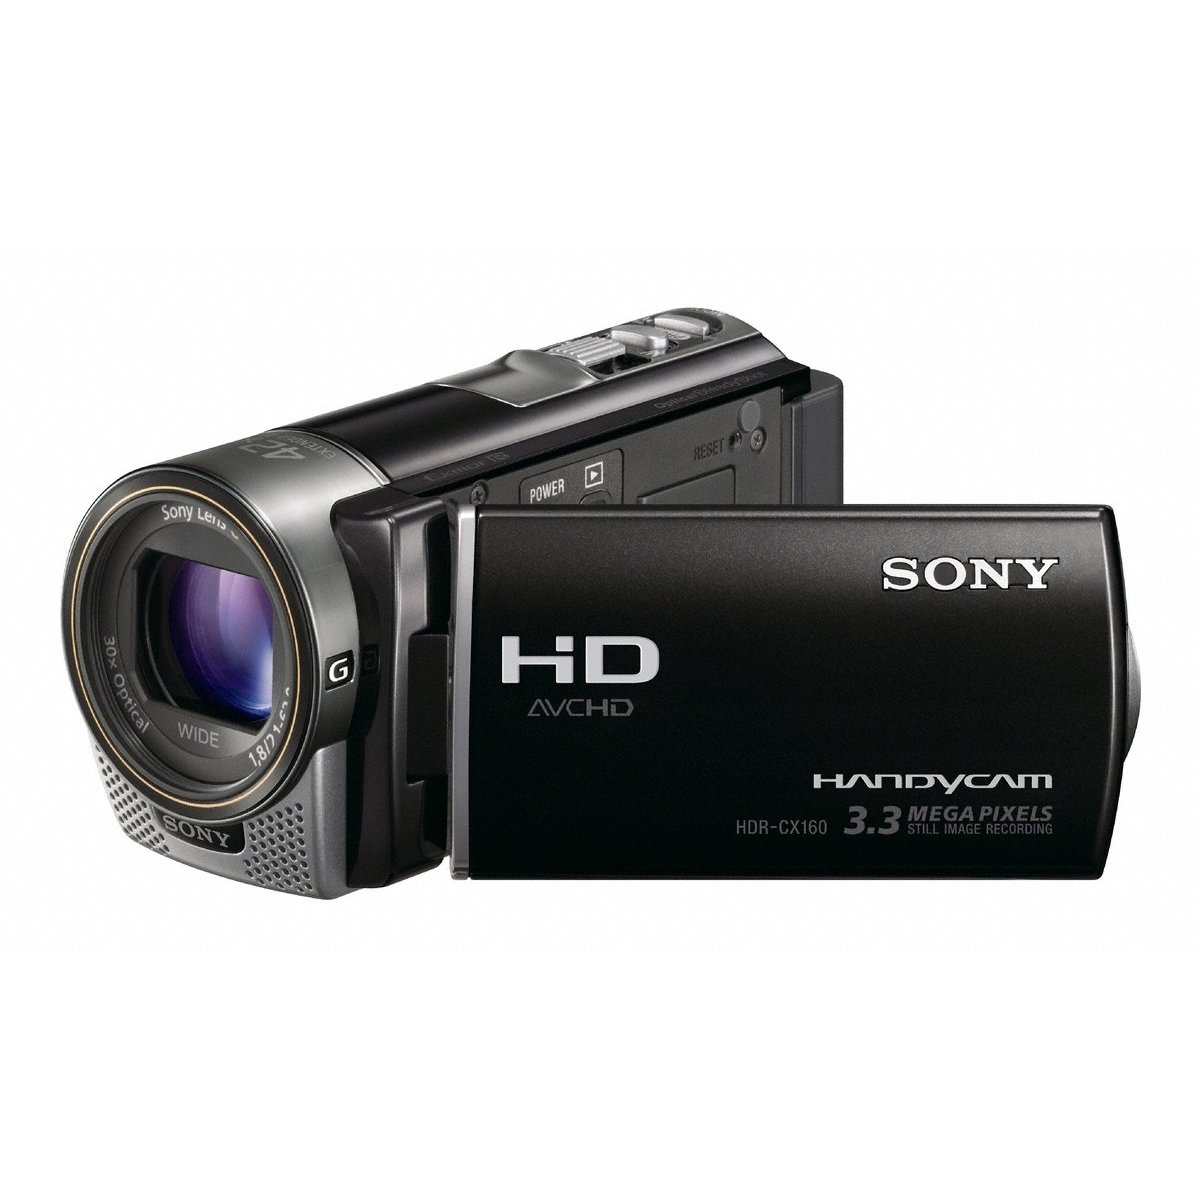 http://thetechjournal.com/wp-content/uploads/images/1110/1319908828-sony-hdrcx160-highdefinition-handycam-camcorder--2.jpg